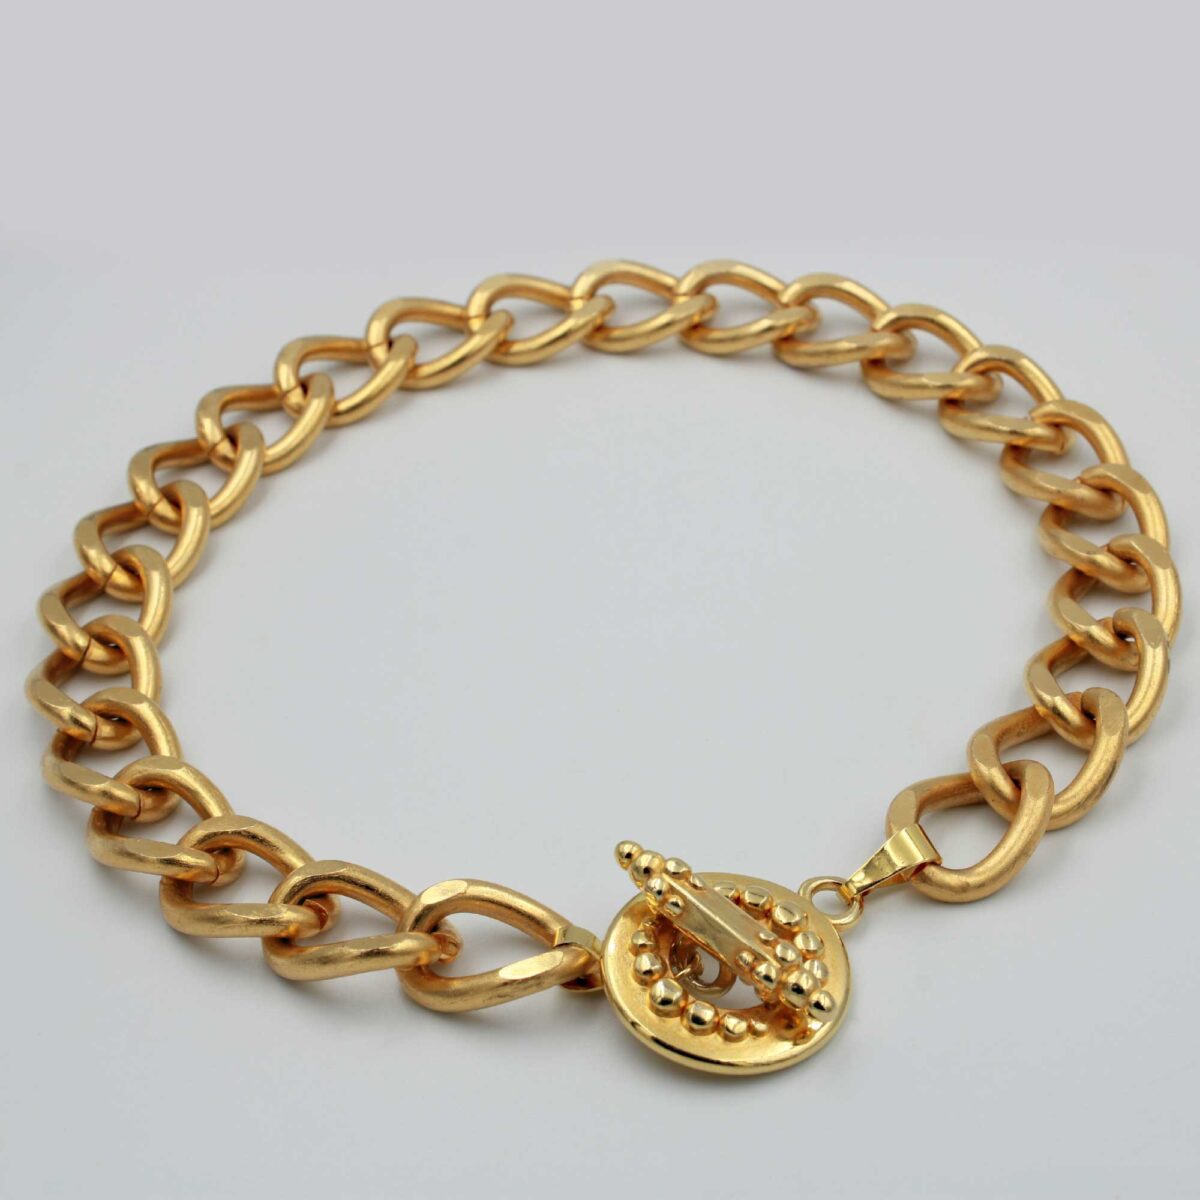 Necklace Chain made of 24k gold plated Steel And T-shaped clasp